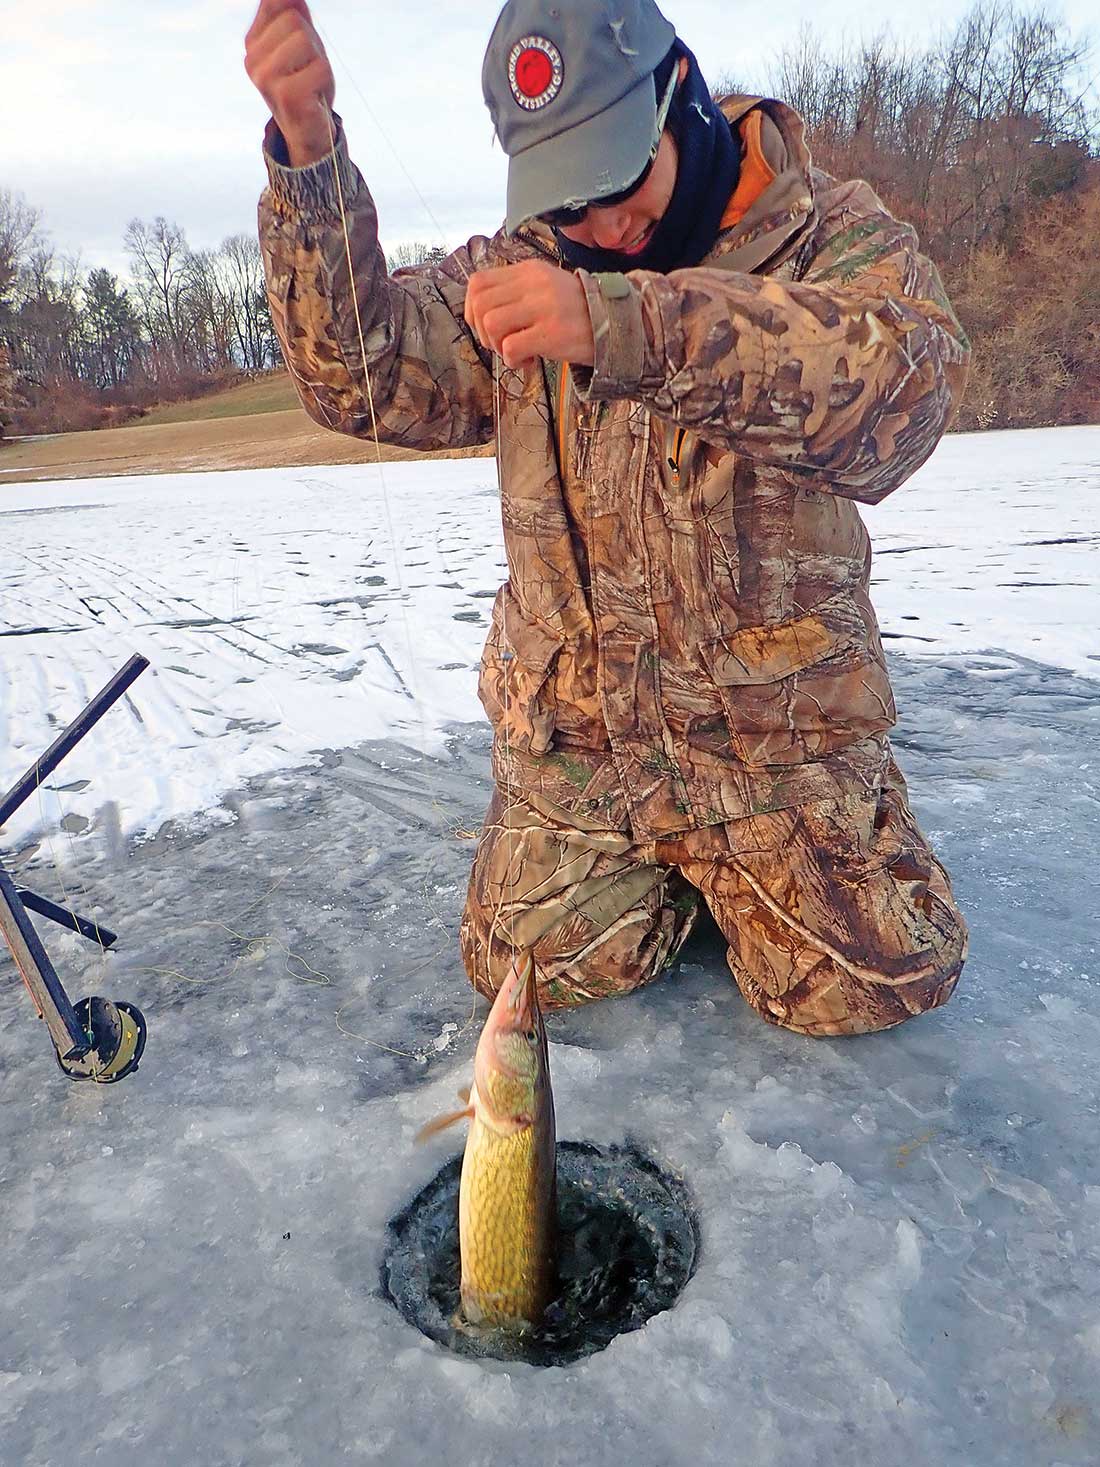 Be sure you have a proper ice auger to drill at minimum a 9- to 10-inch diameter hole to pull a large fish through without having to chip away at the ice.